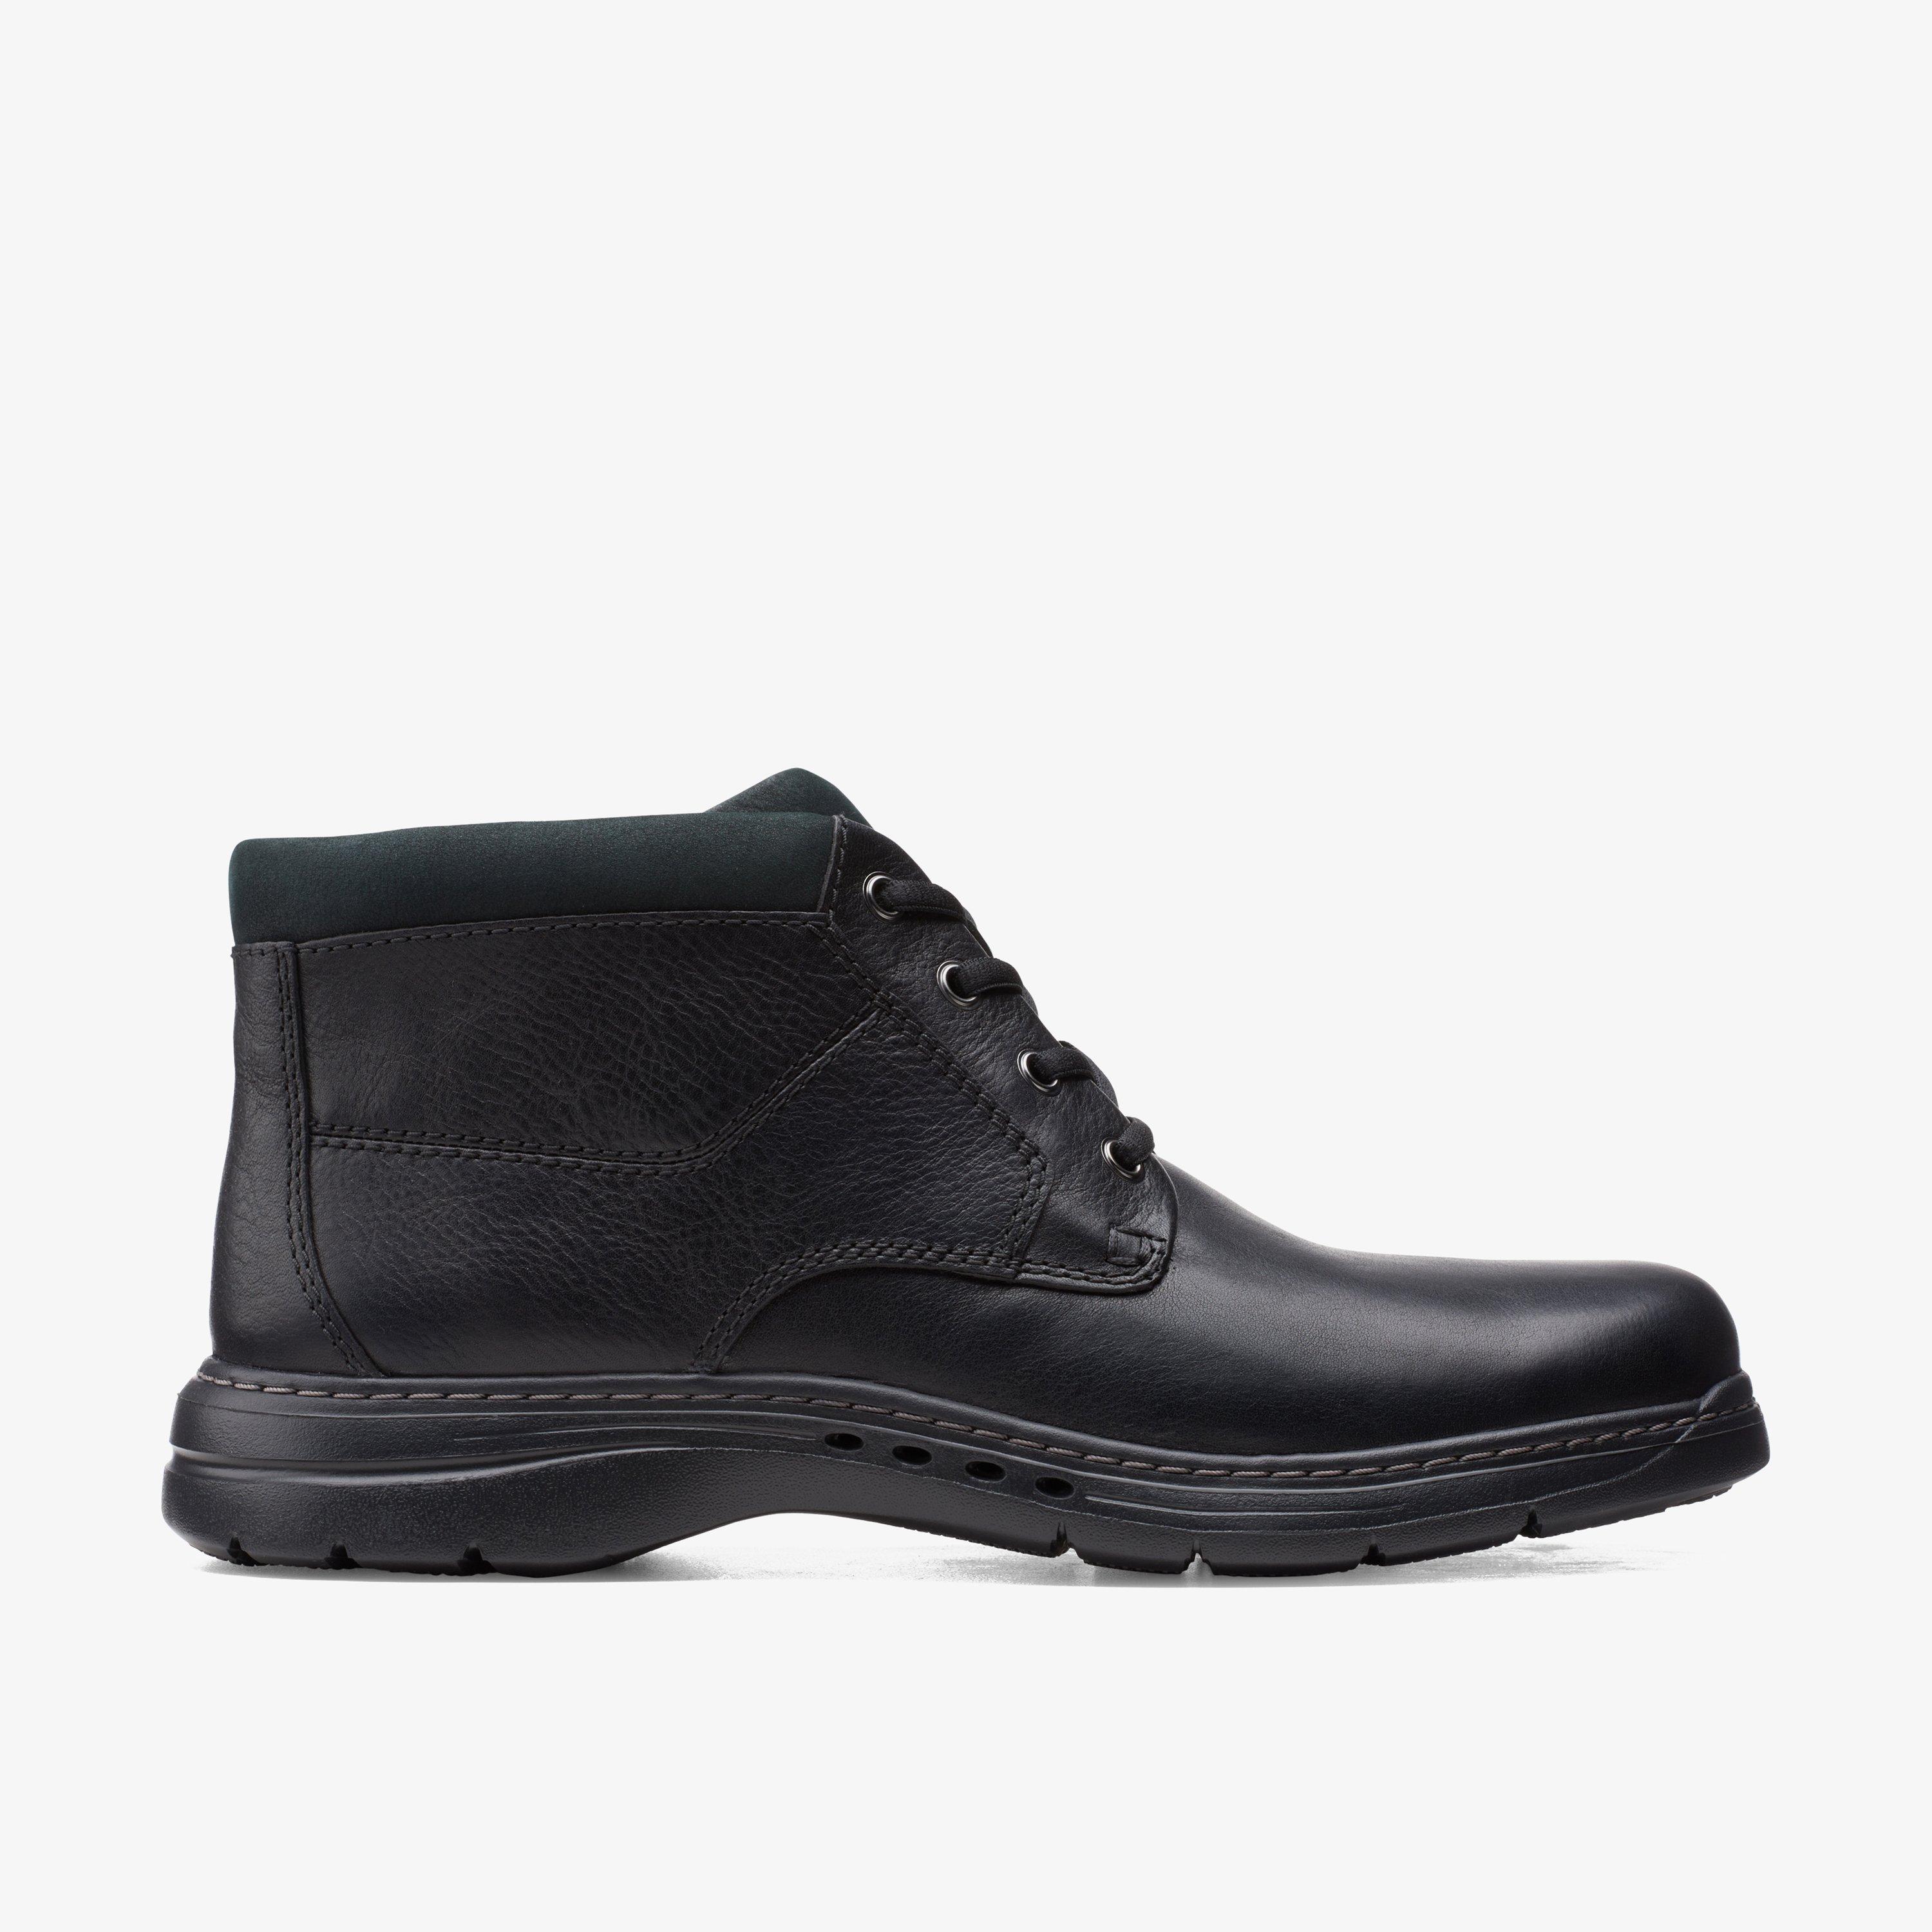 Mens Un Brawley Up Black Leather Boots | Clarks Outlet